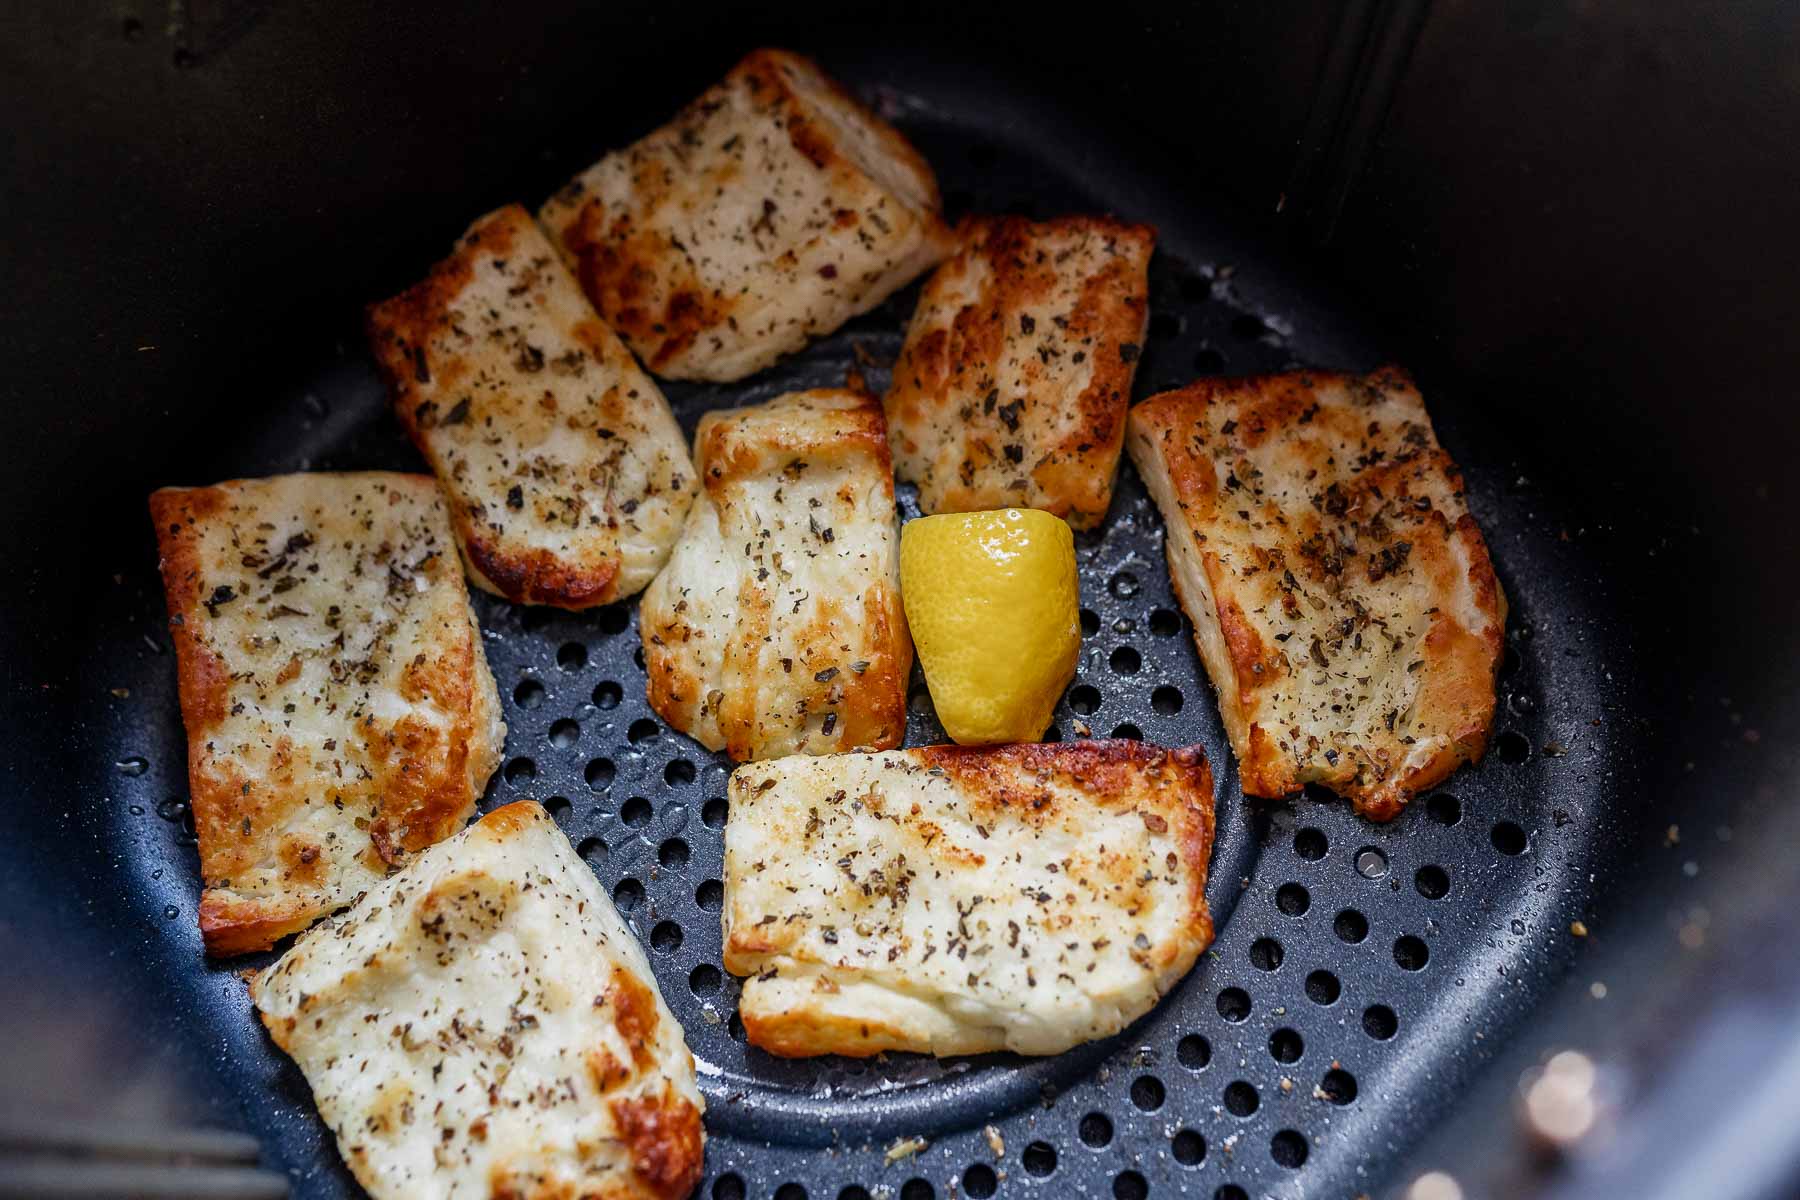 Slices of golden cheese rest in the bottom of an air fryer basket next to a fresh lemon wedge.